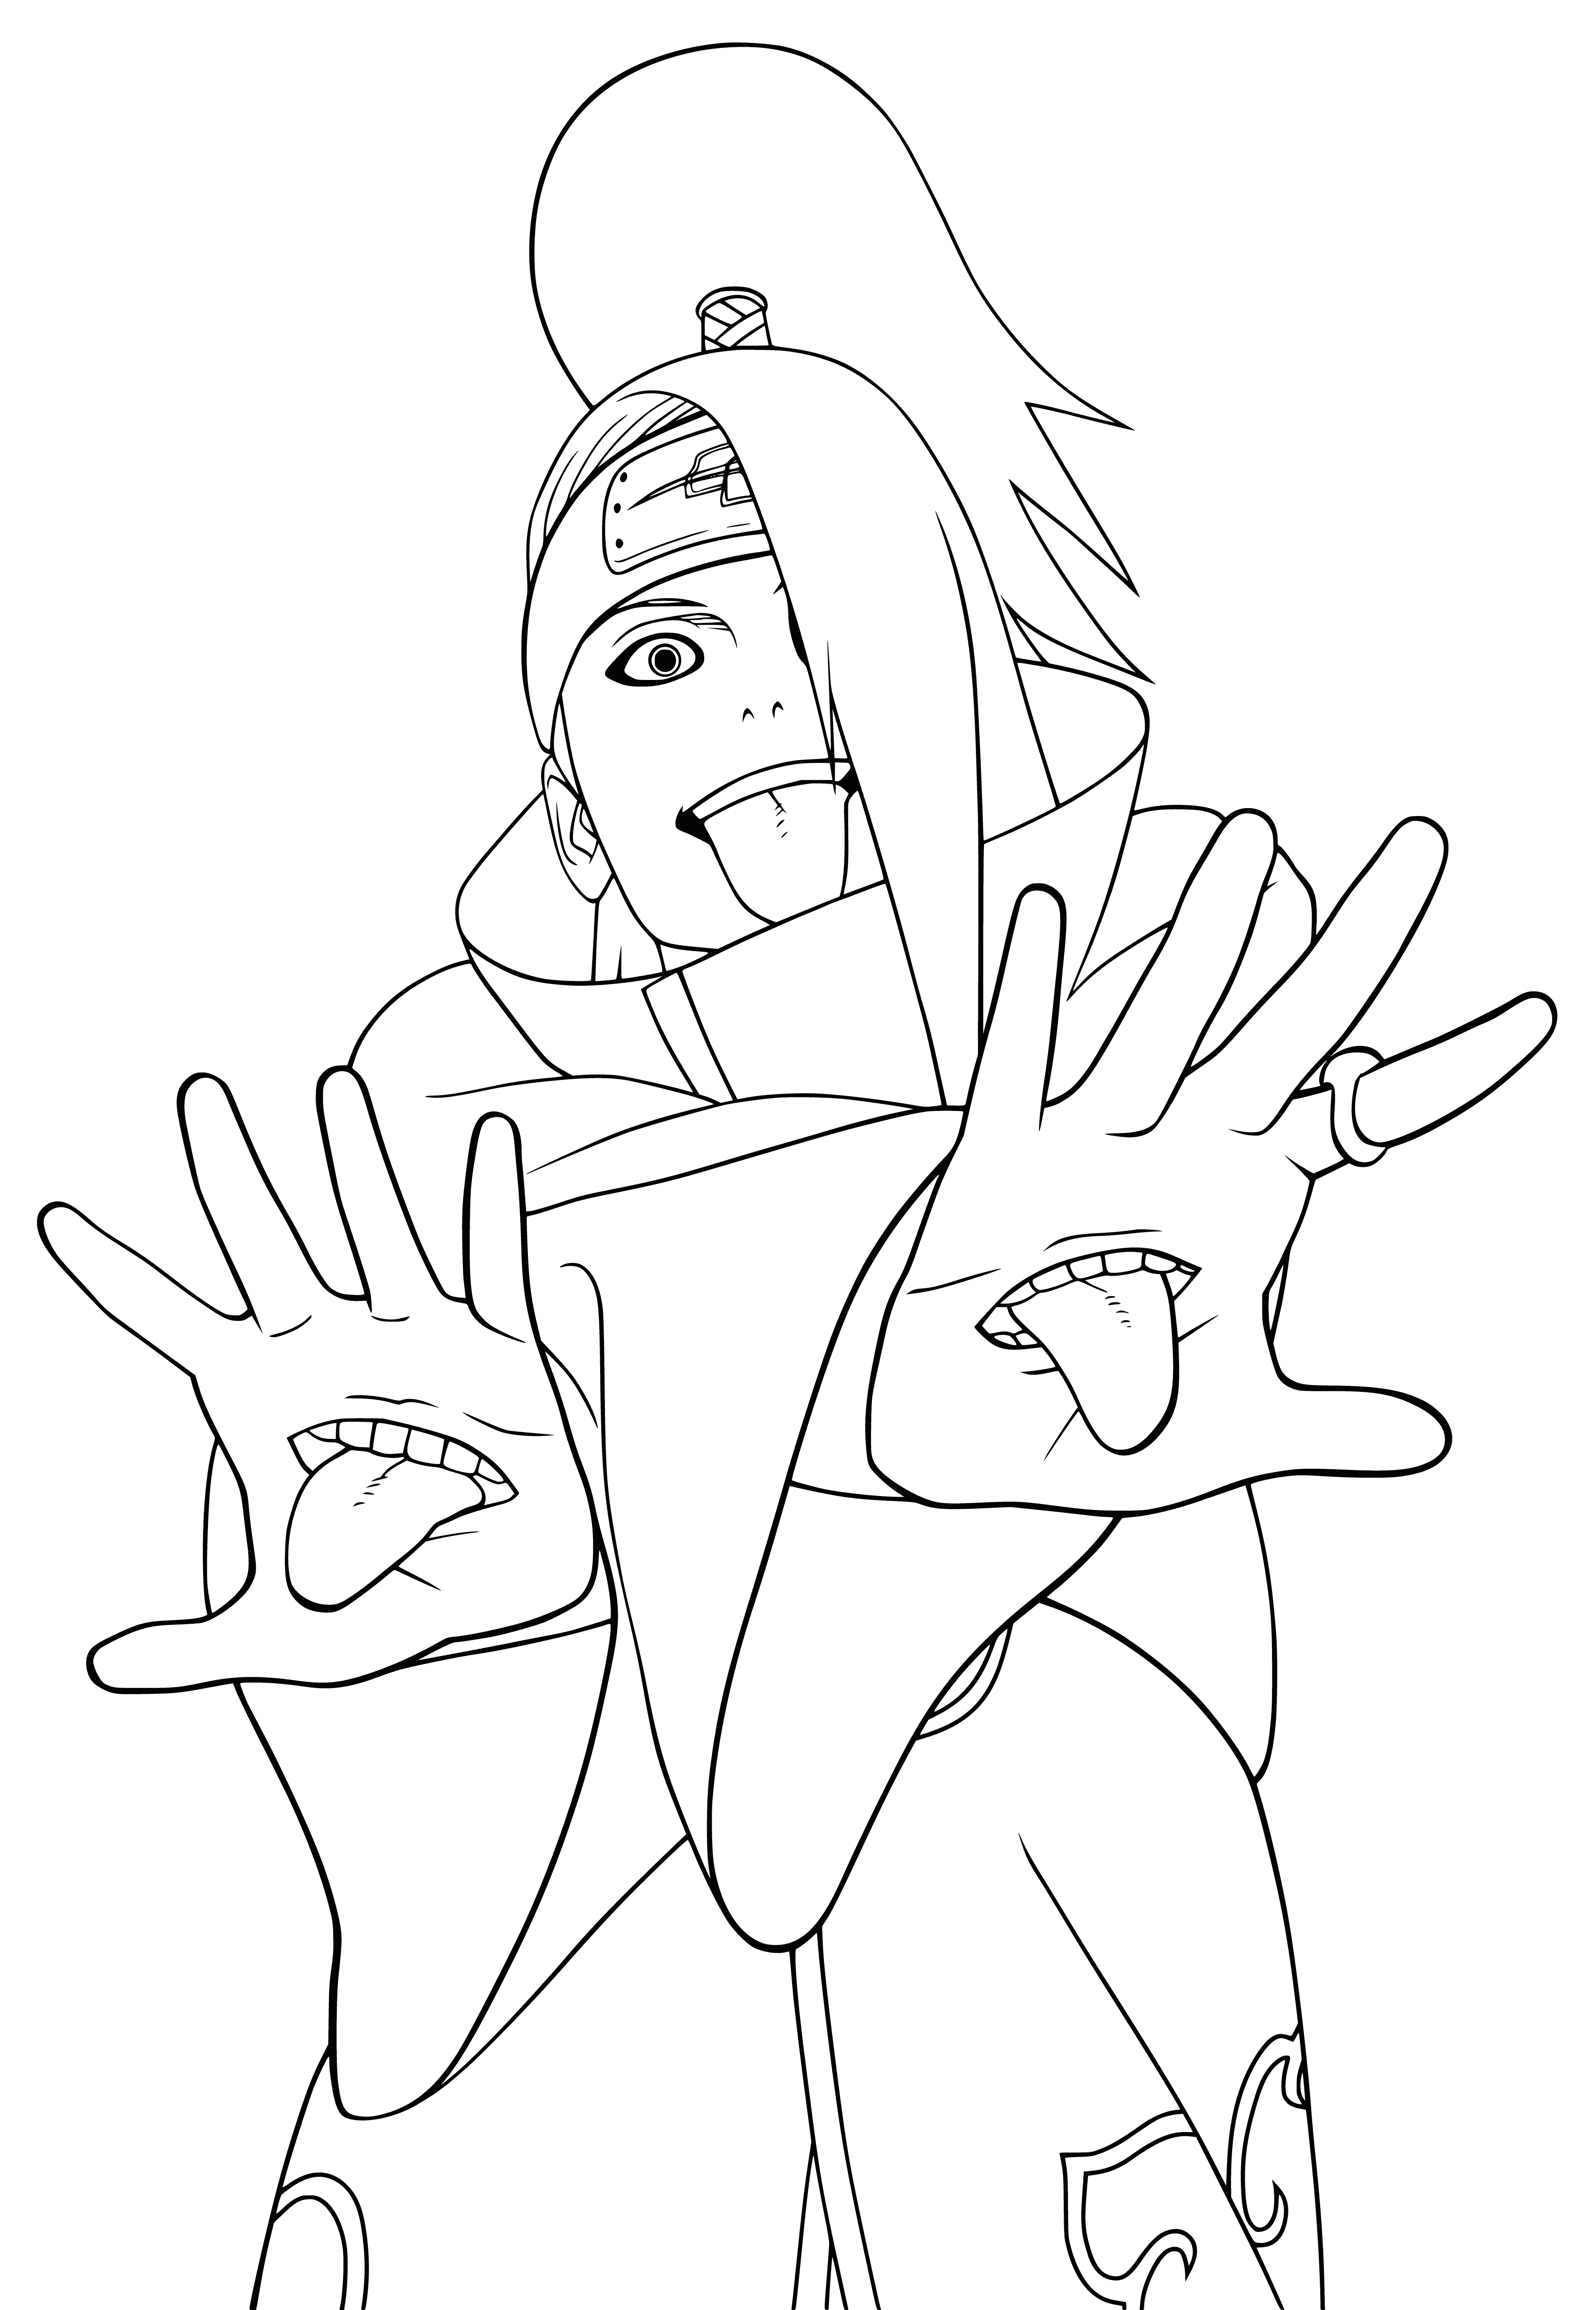 coloring page: Man with blond hair and blue eyes, wearing blue/white outfit and billowing cape. Holding sculpted bird, tattoo on forehead and scar on cheek.